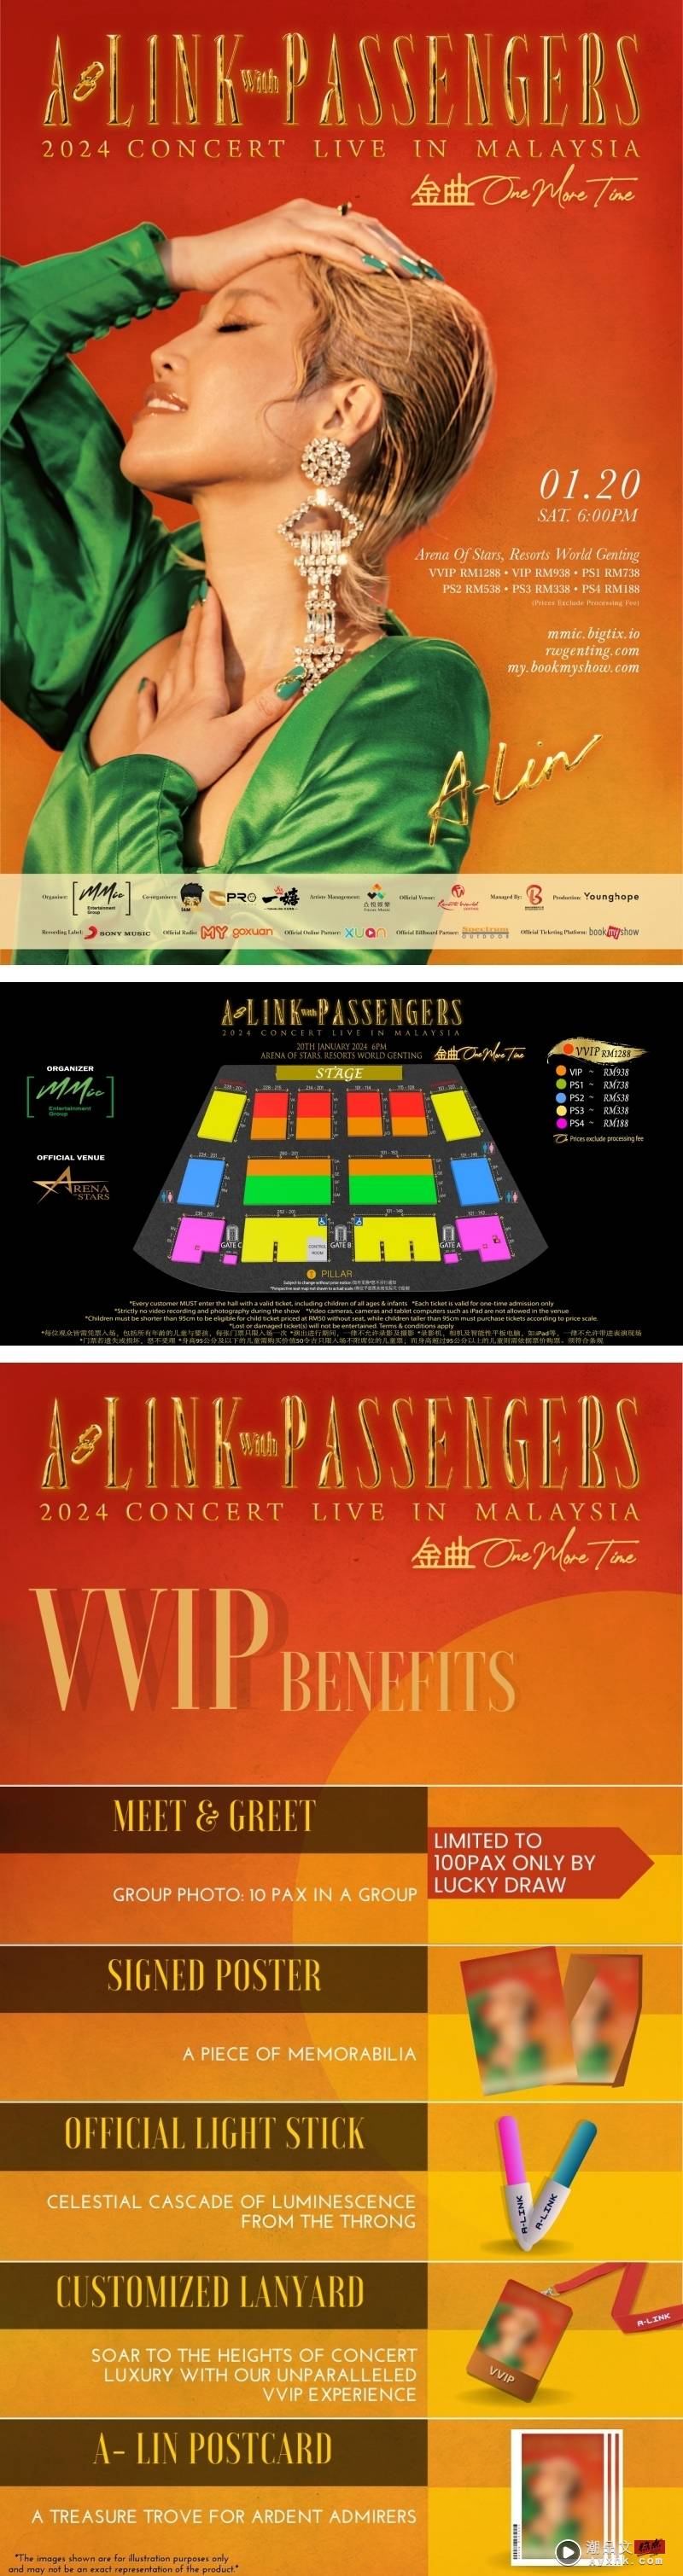 《A-LINK with PASSENGERS》2024 Concert Live In Malaysia 金曲One More Time